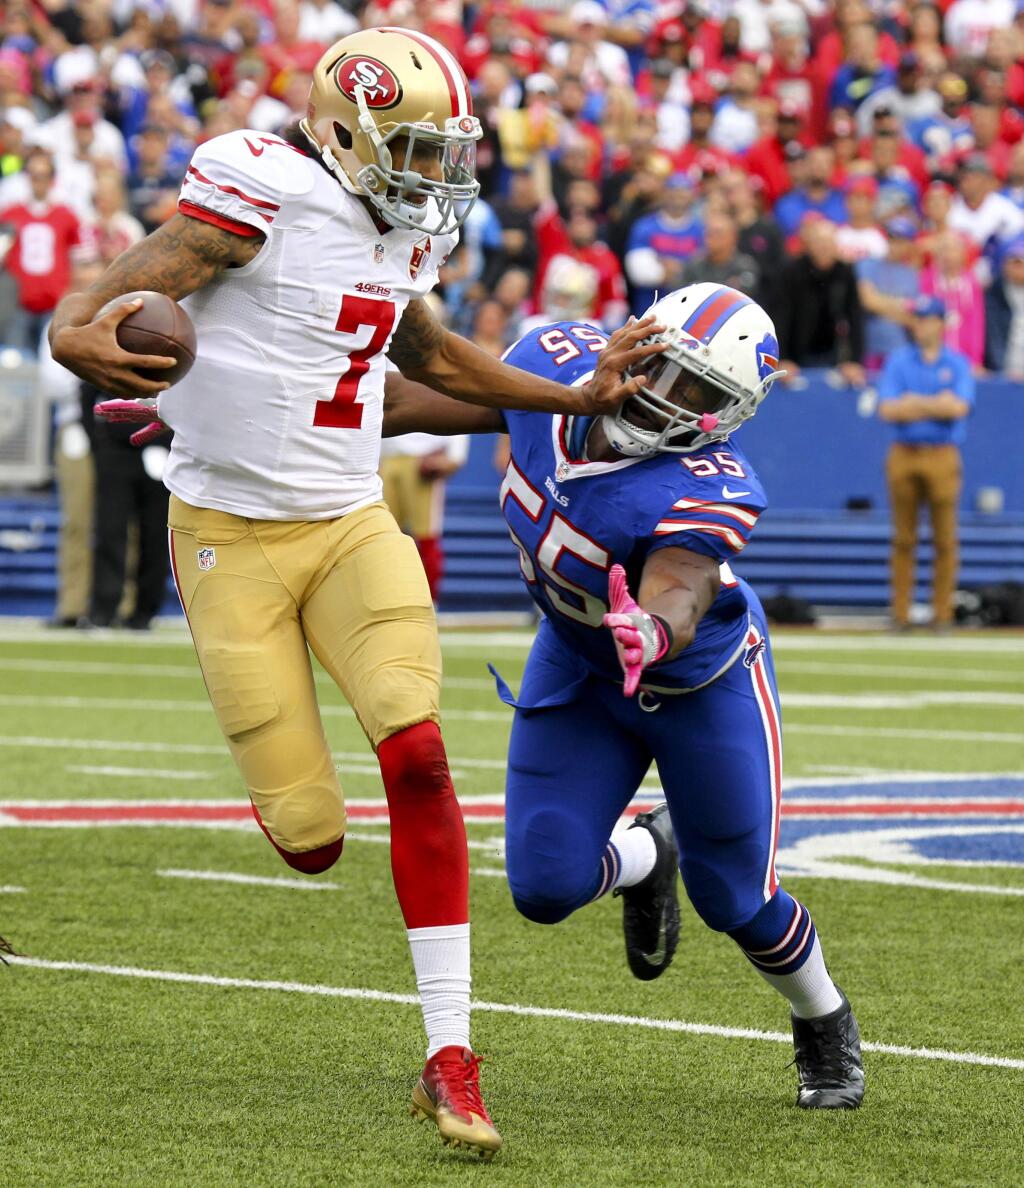 San Francisco 49ers quarterback Colin Kaepernick (7) pushes off Buffalo Bills outside linebacker Jerry Hughes (55) during the second half of an NFL football game on Sunday, Oct. 16, 2016, in Orchard Park, N.Y. (AP Photo/Jeffrey T. Barnes)